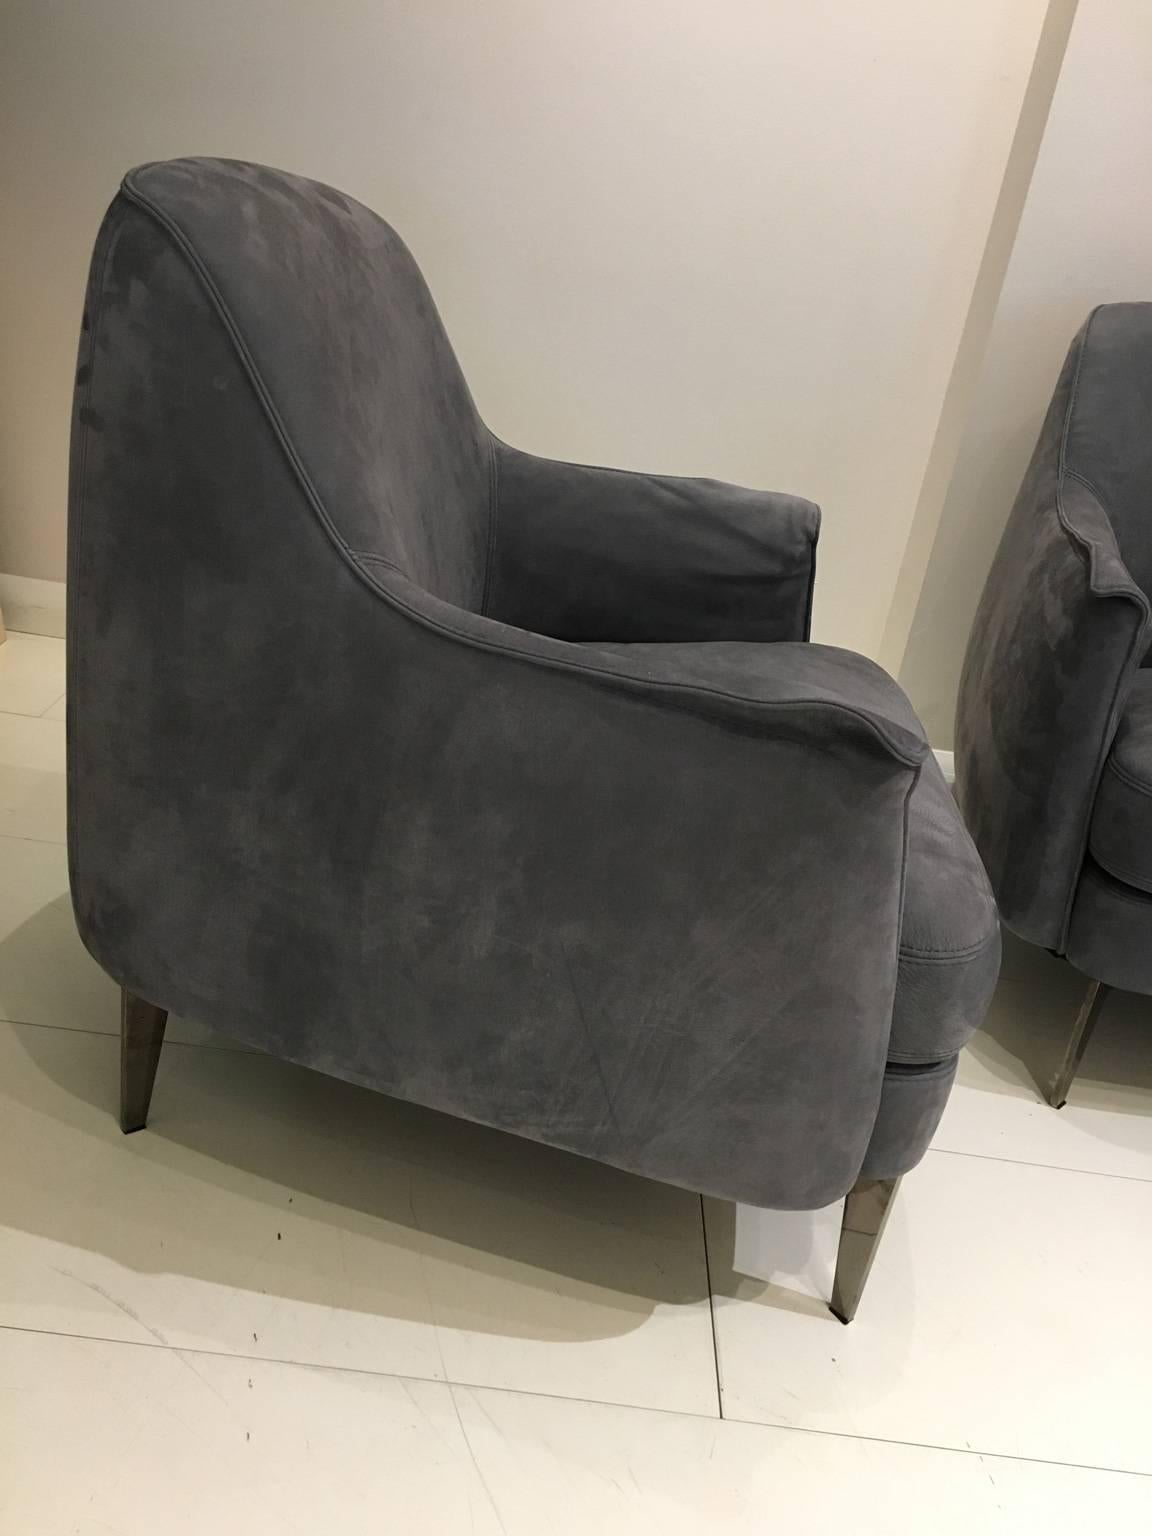 Italian Pair of Armchairs in Light Grey Nubuk Leather with Black Chrome Legs by Cierre